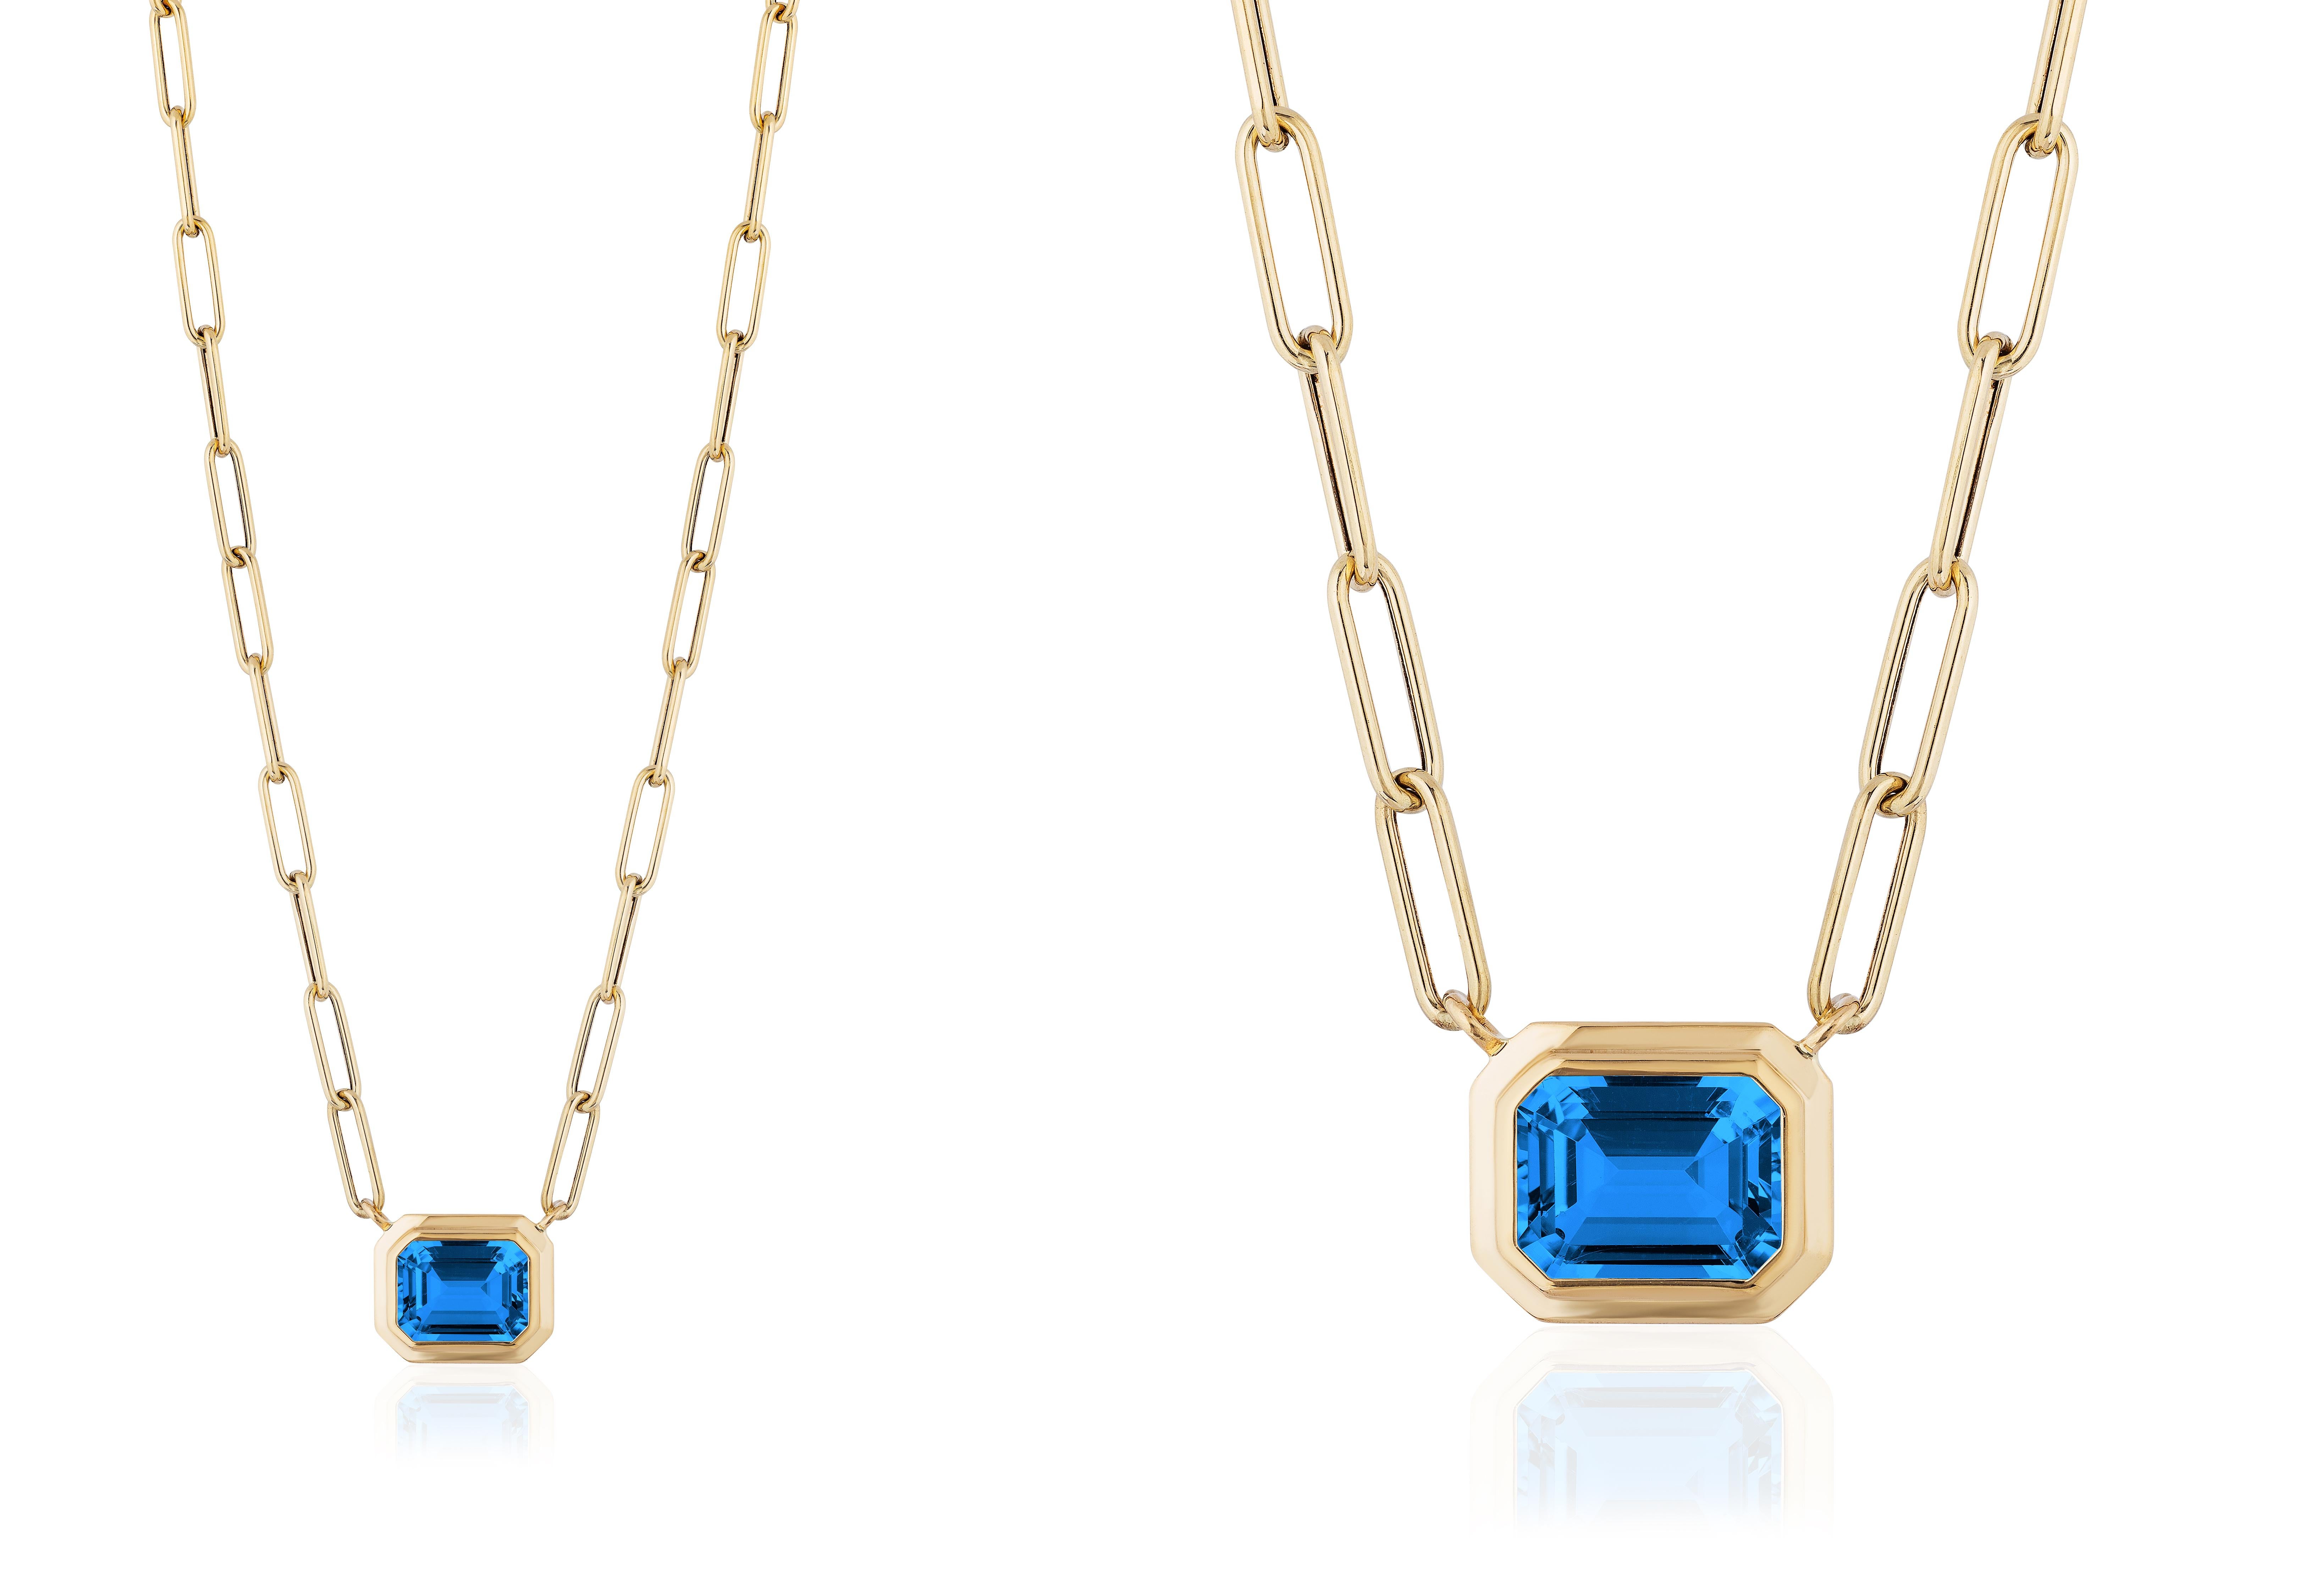 This beautiful East- West London Blue Topaz Emerald Cut Bezel Set Pendant in 18K Yellow Gold is from our ‘Manhattan’ Collection. Minimalist lines yet bold structures are what our Manhattan Collection is all about. Our pieces represent the famous